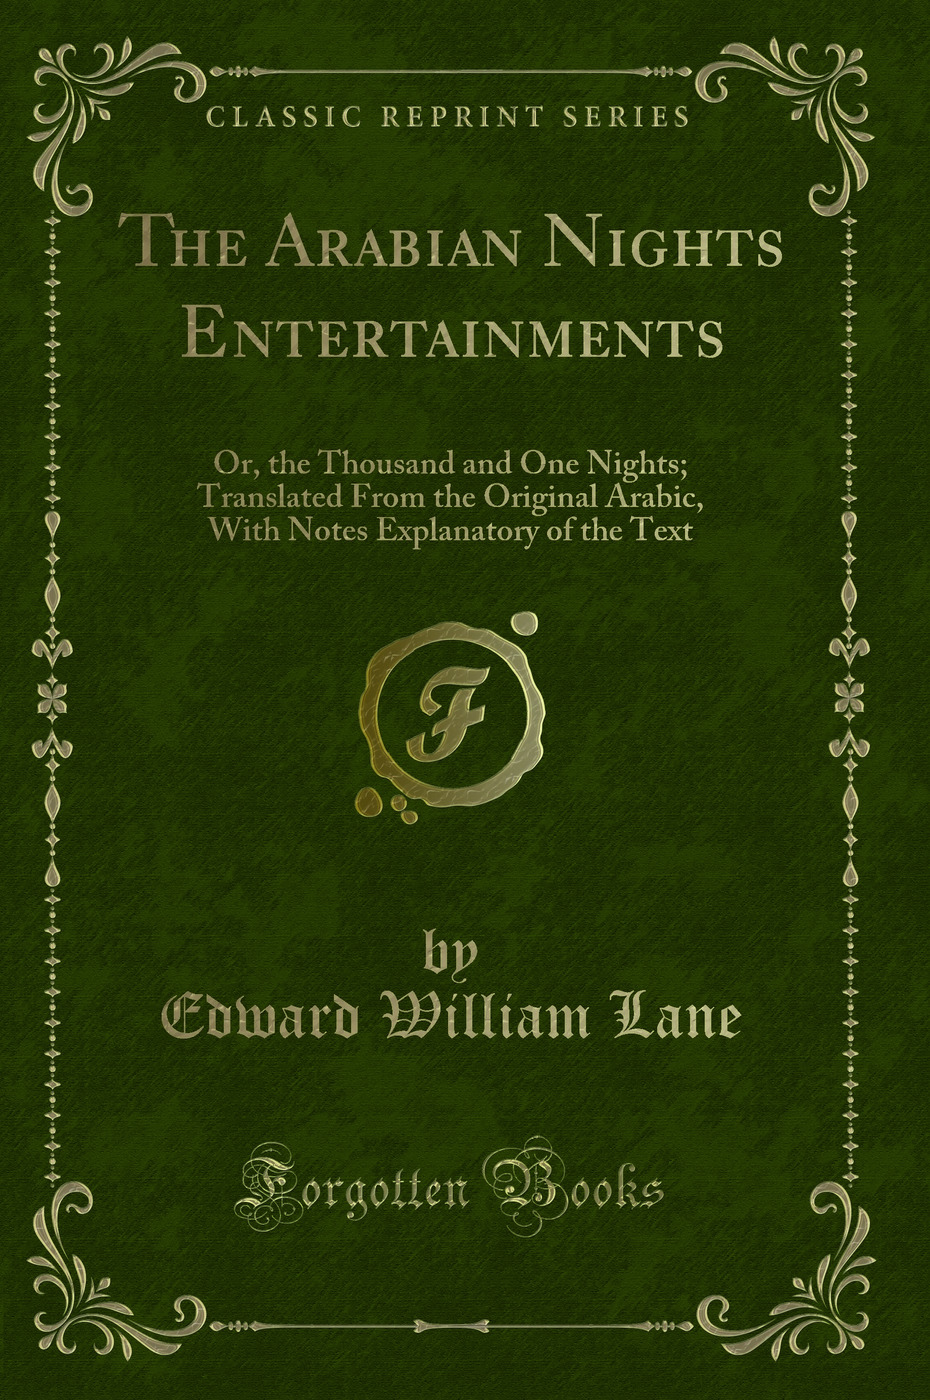 The Arabian Nights Entertainments: Or, the Thousand and One Nights - Edward William Lane